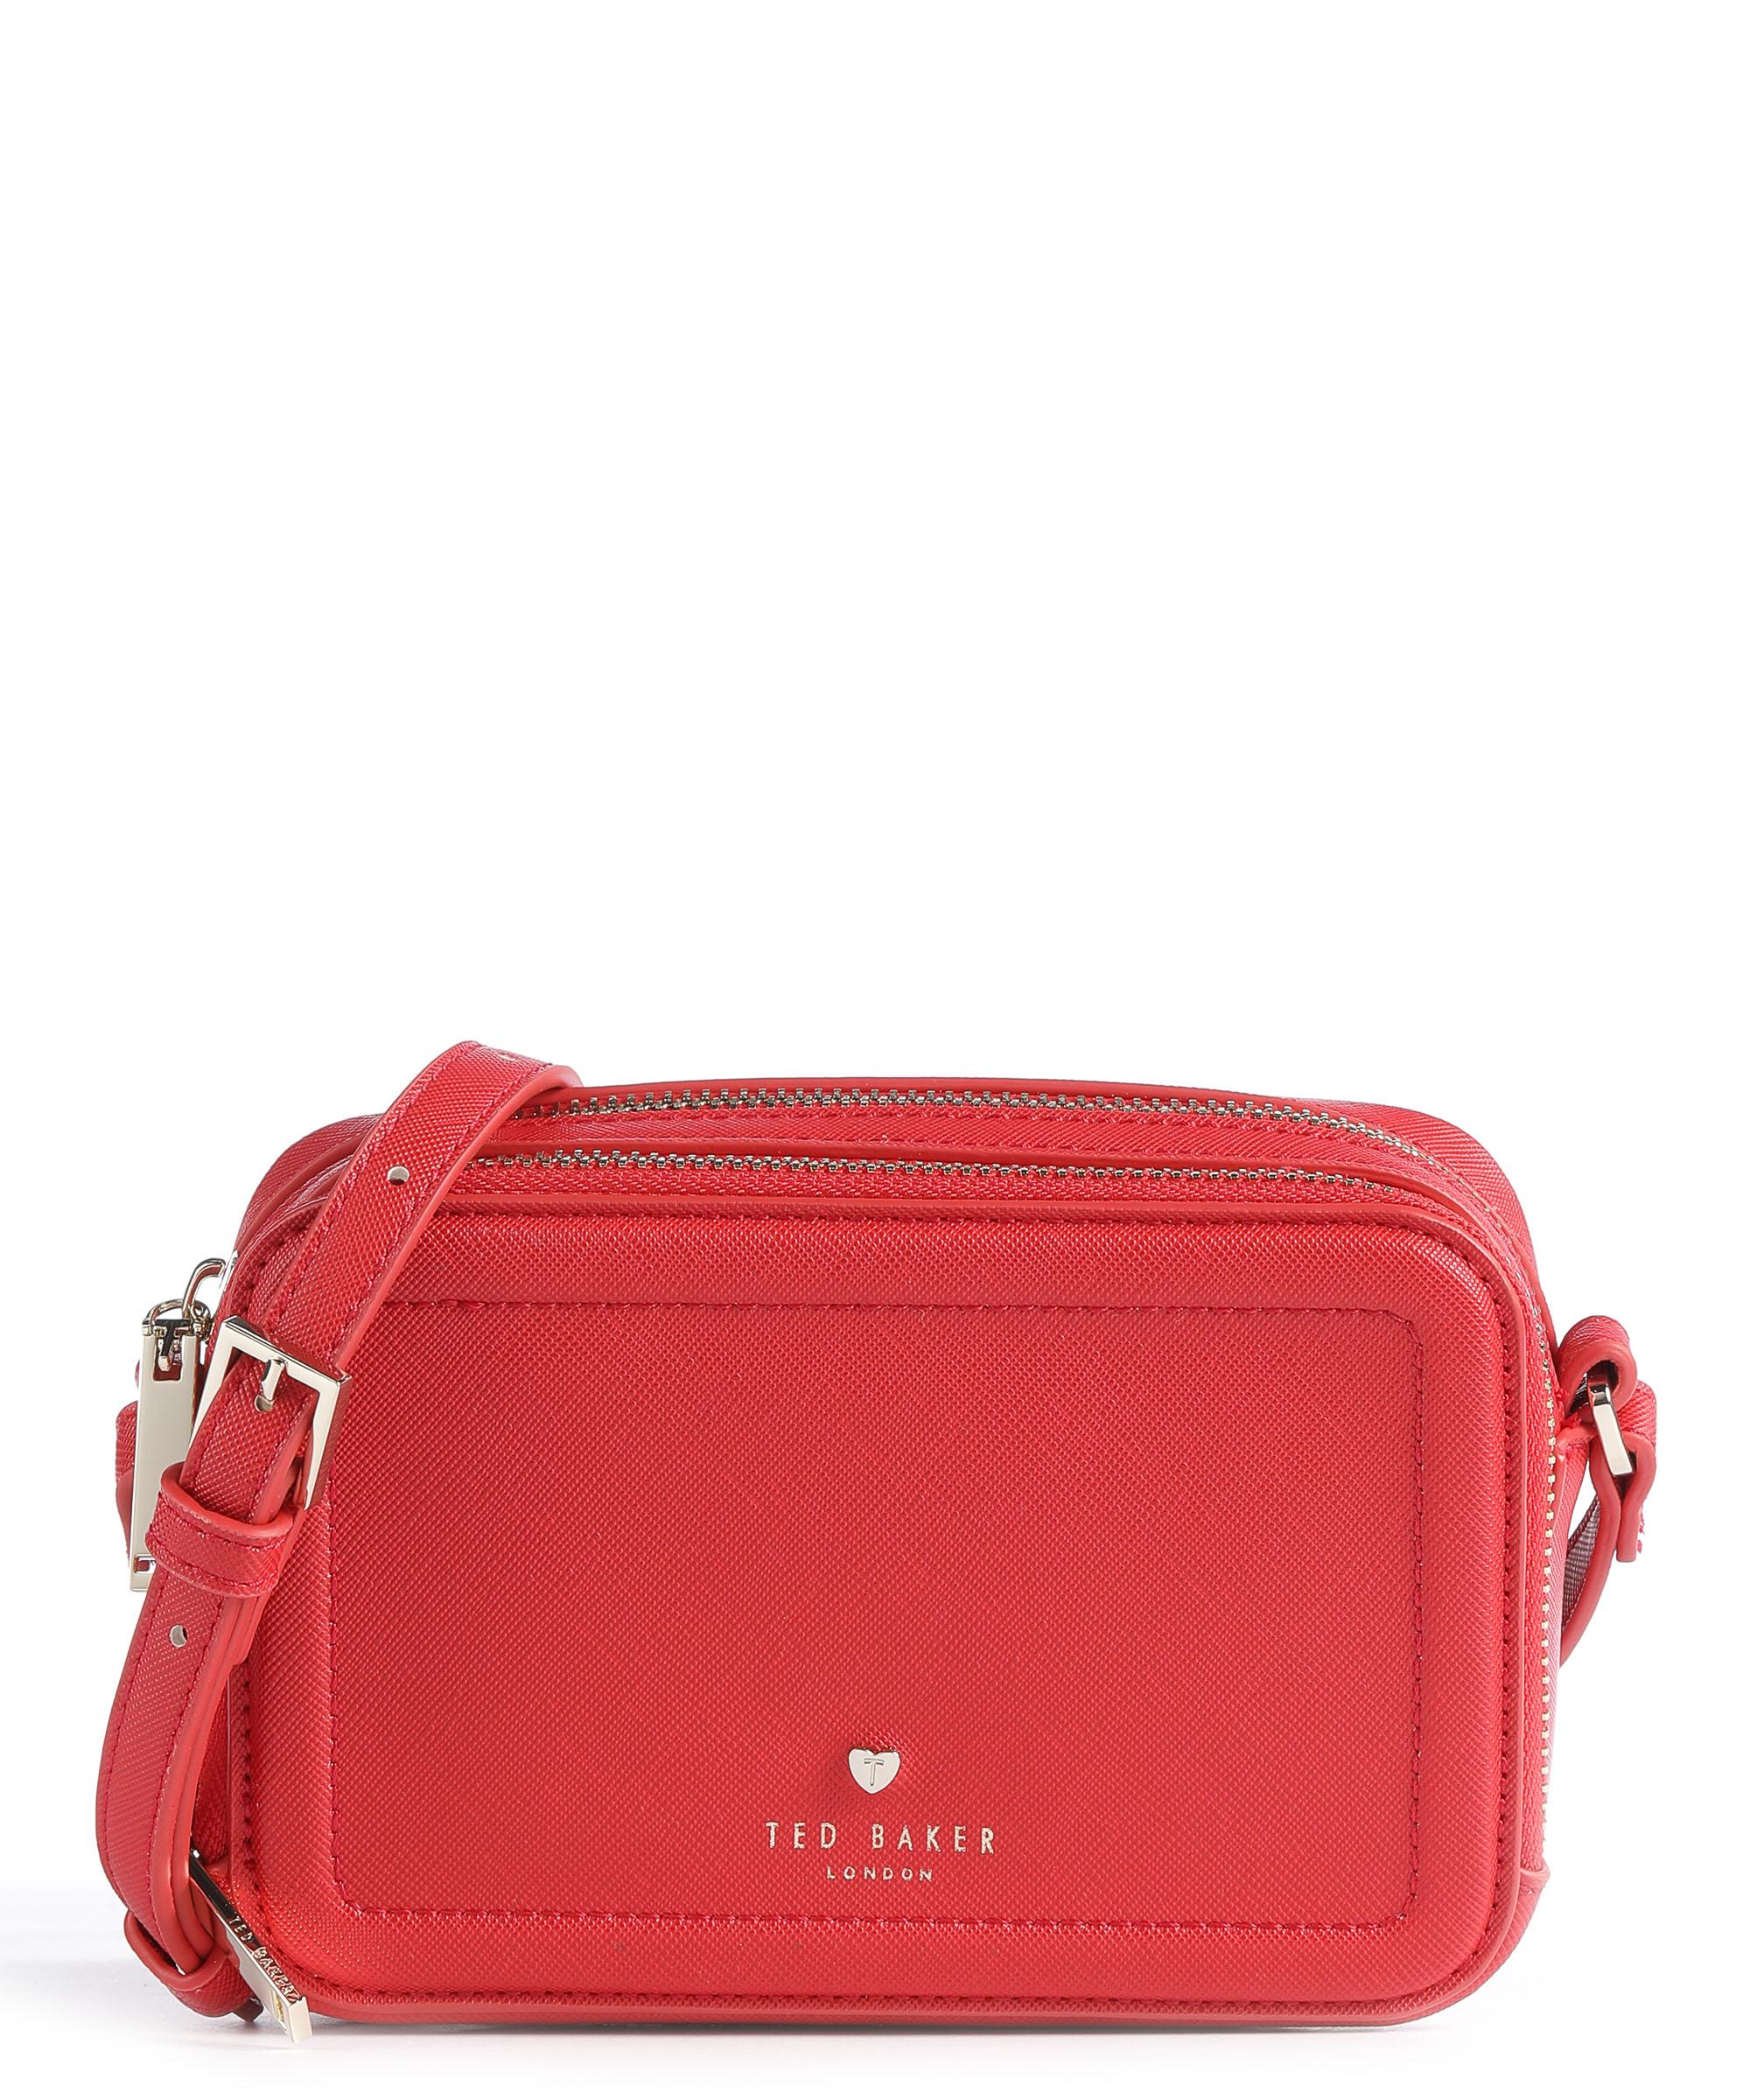 AYSHANA - RED | Bags | Ted Baker ROW